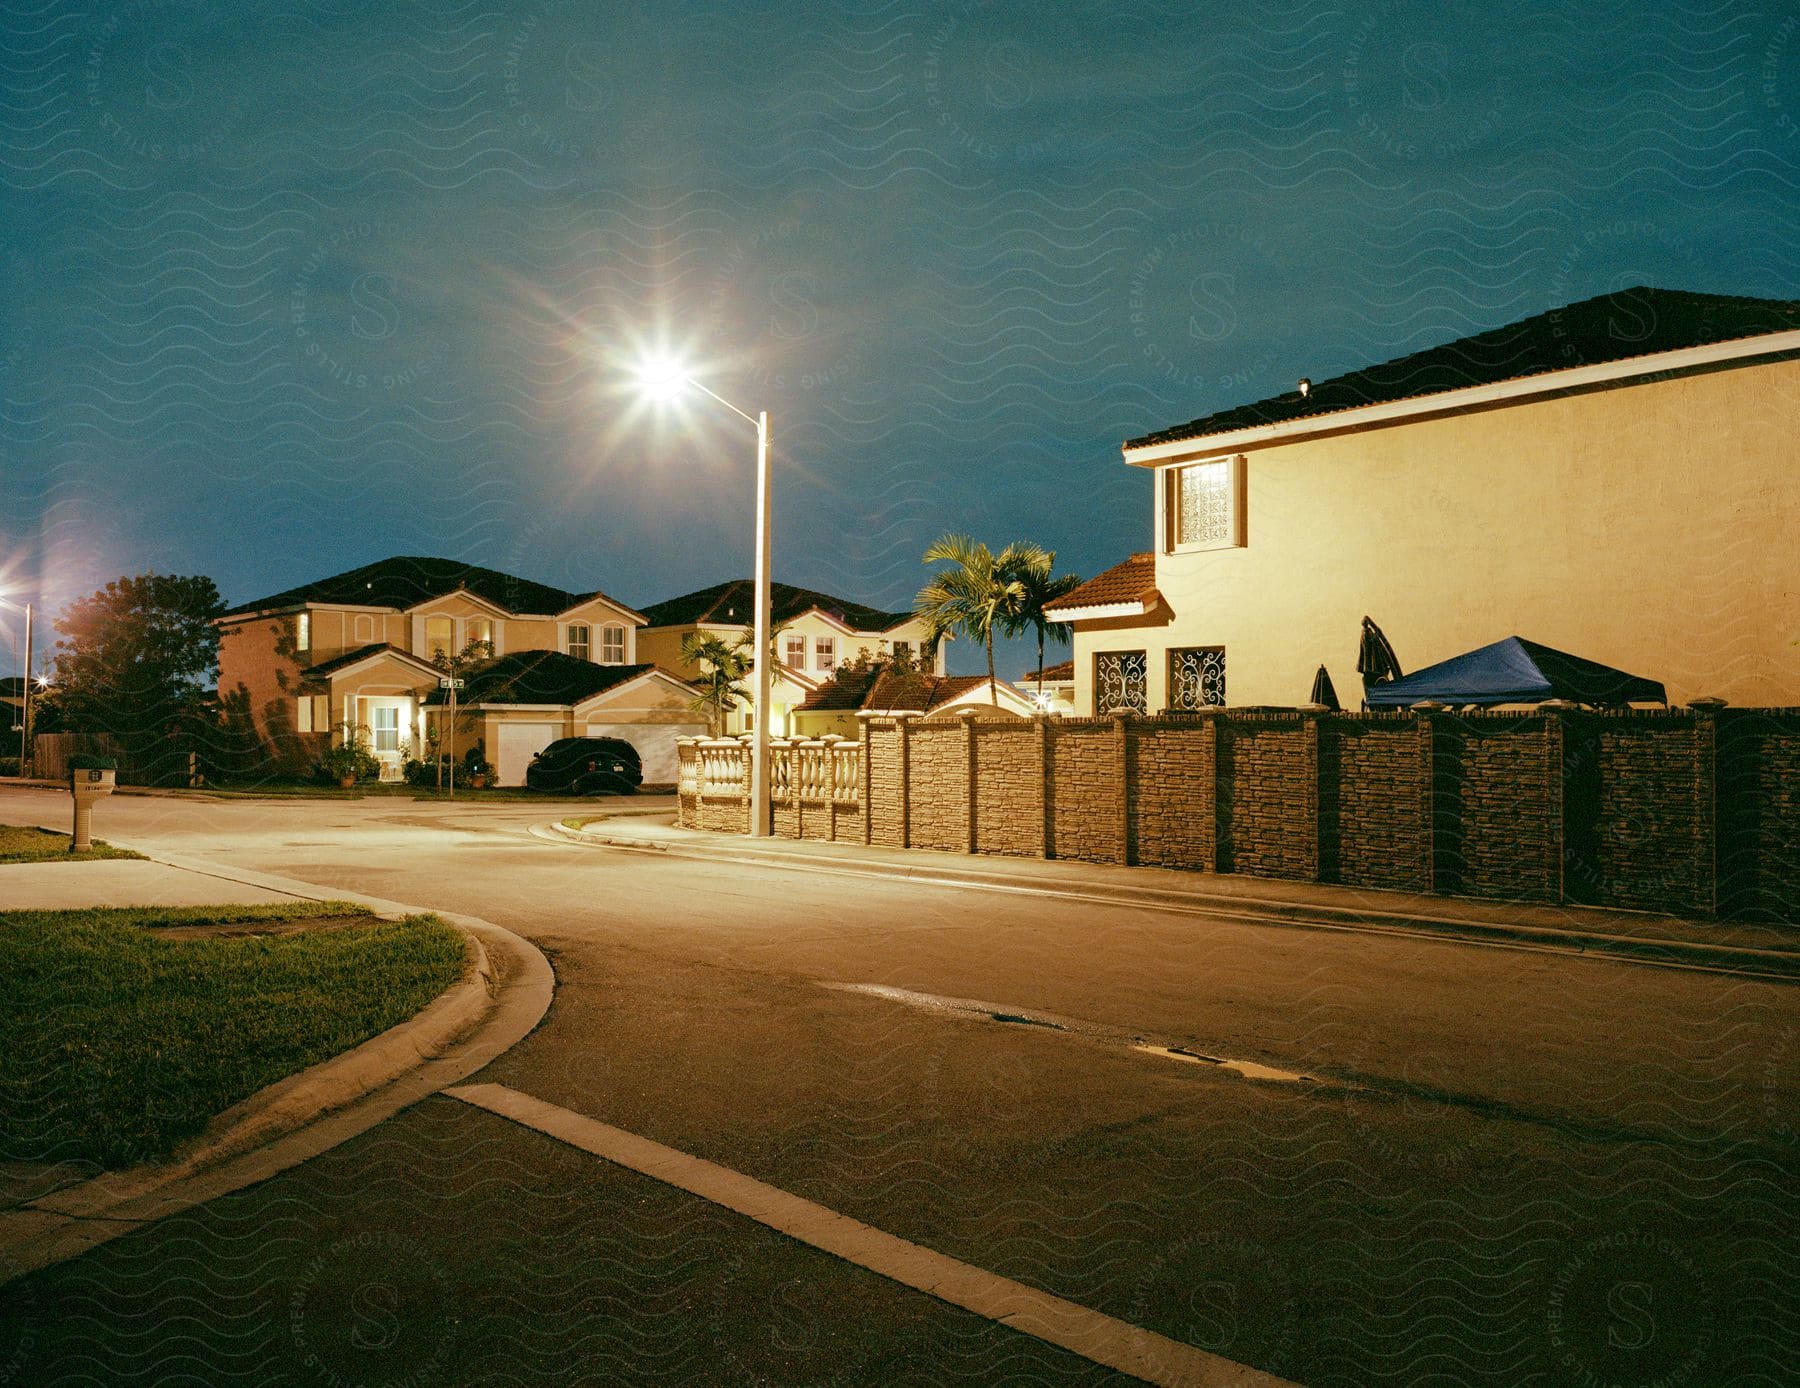 Curved road near fence with glowing street lights in a neighborhood with houses and trees